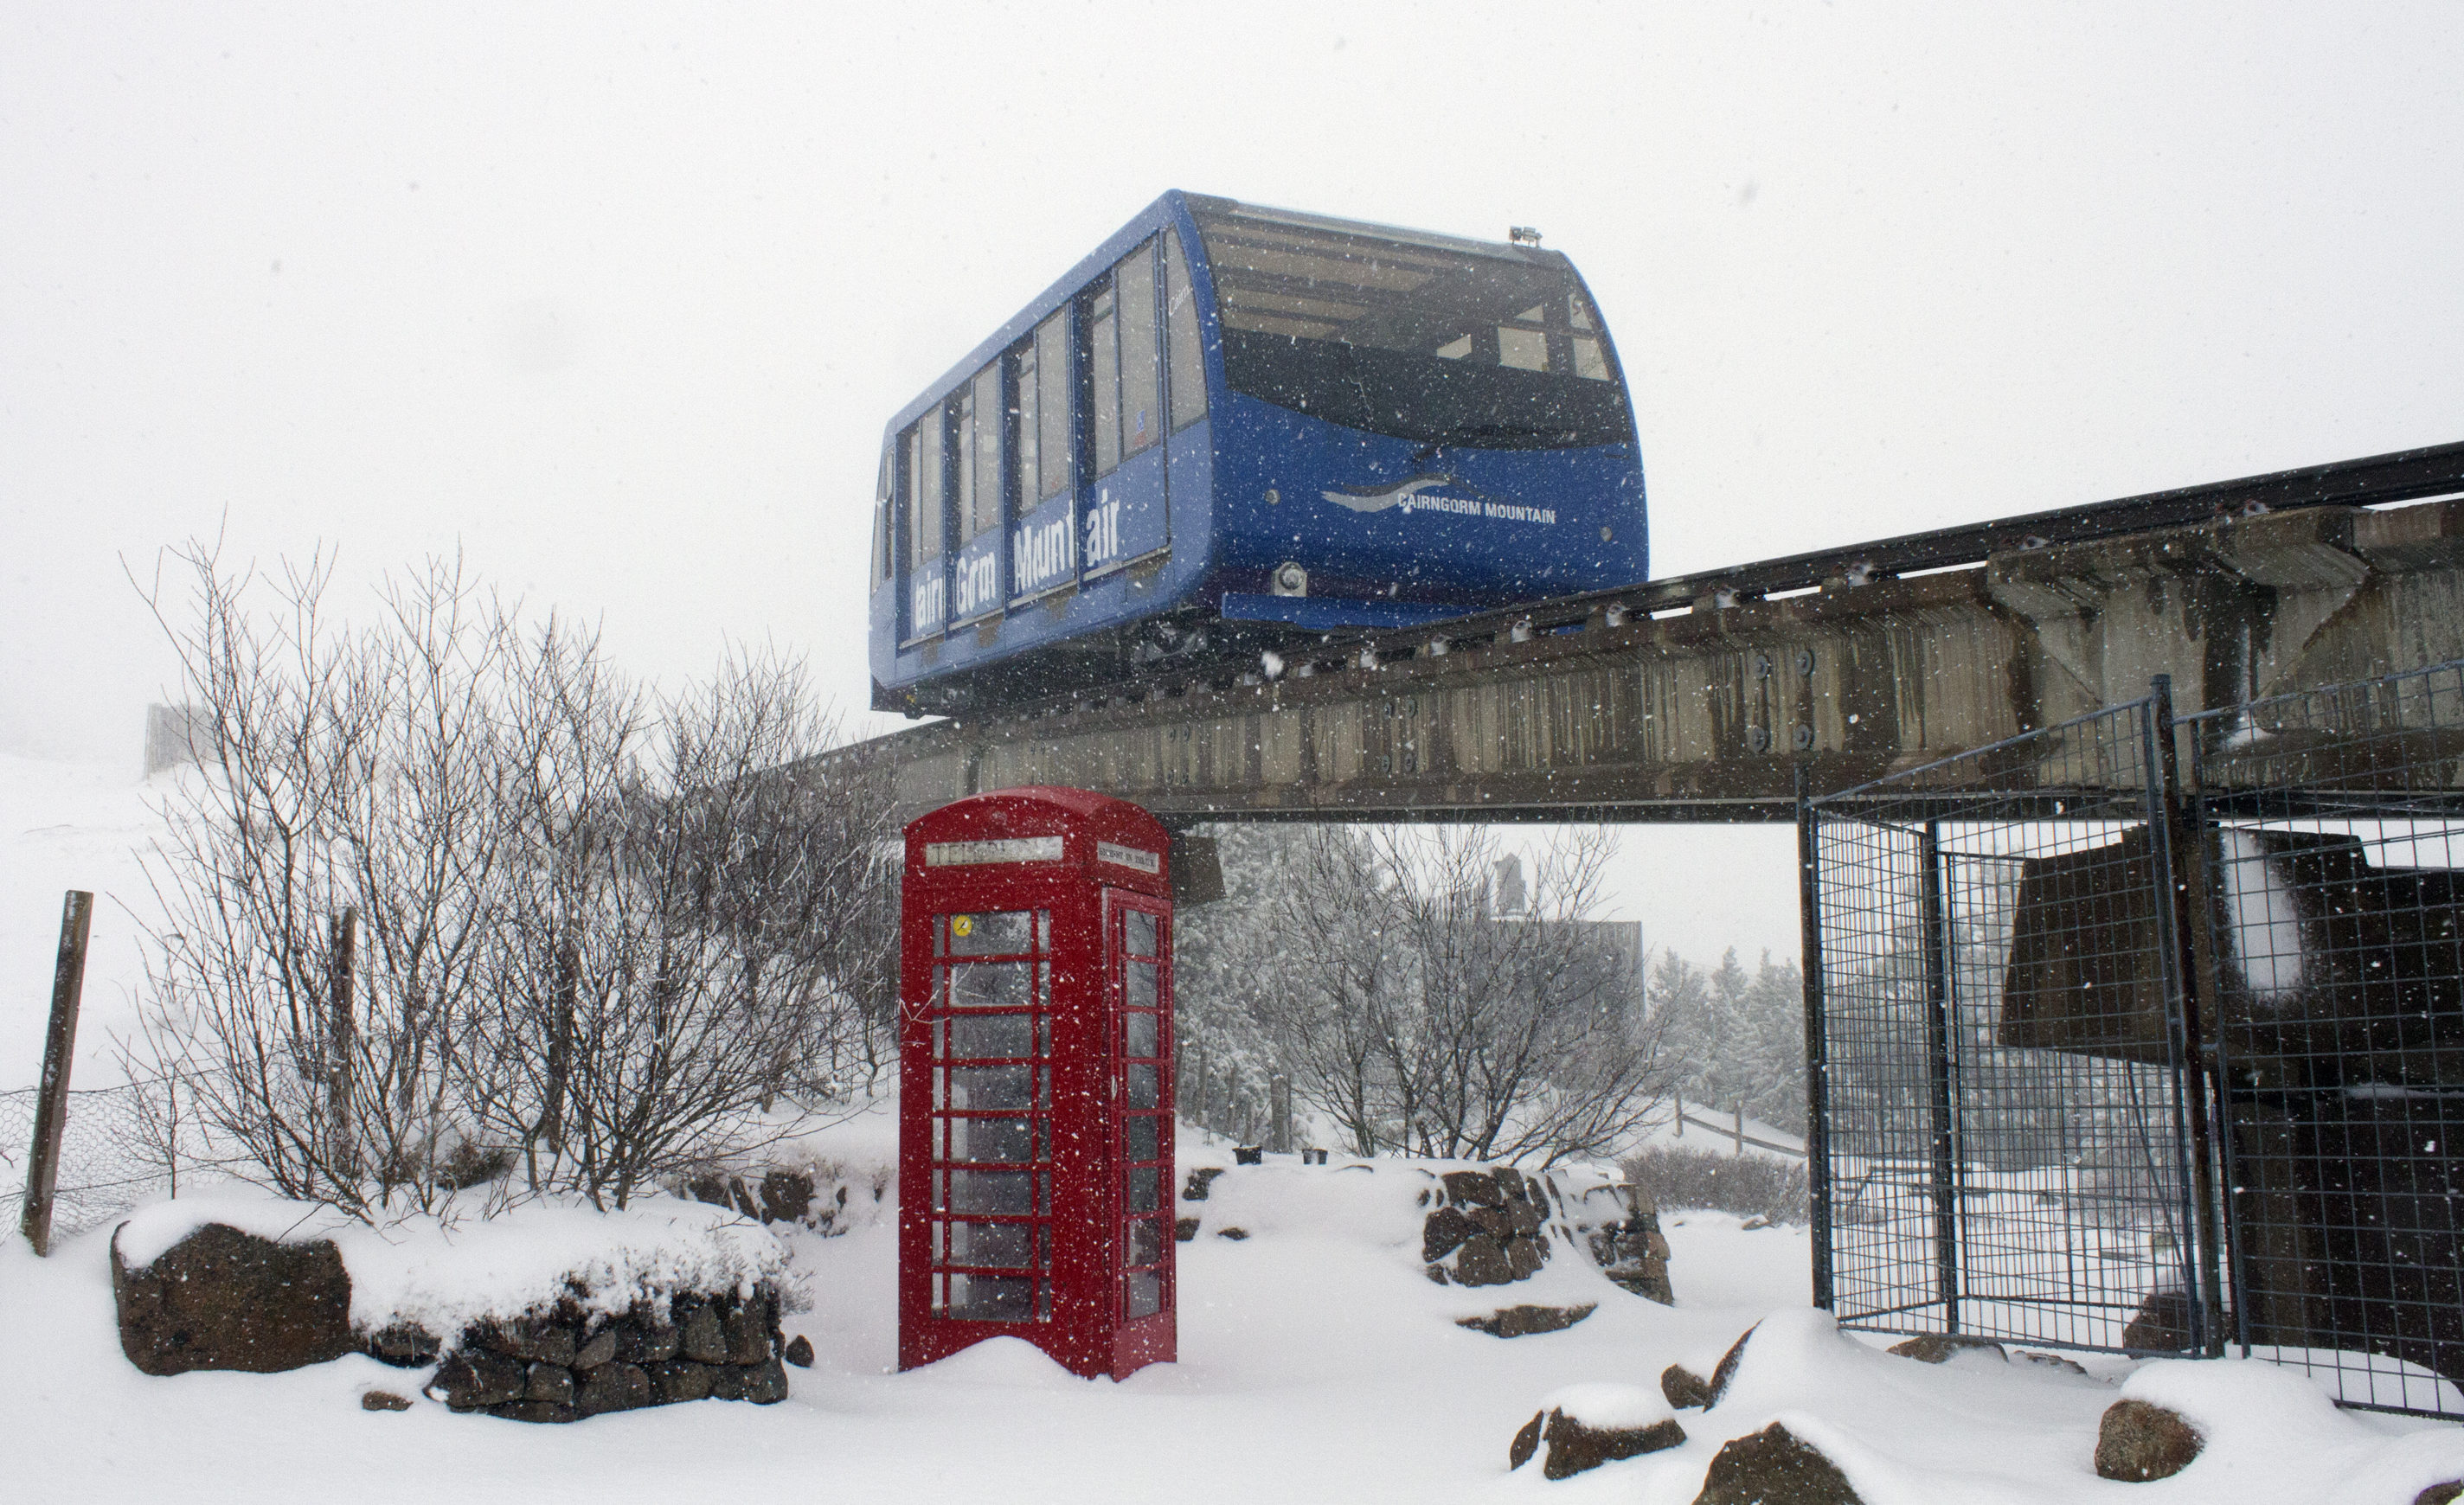 The funicular railway at CairnGorm Mountain in snowy conditions.